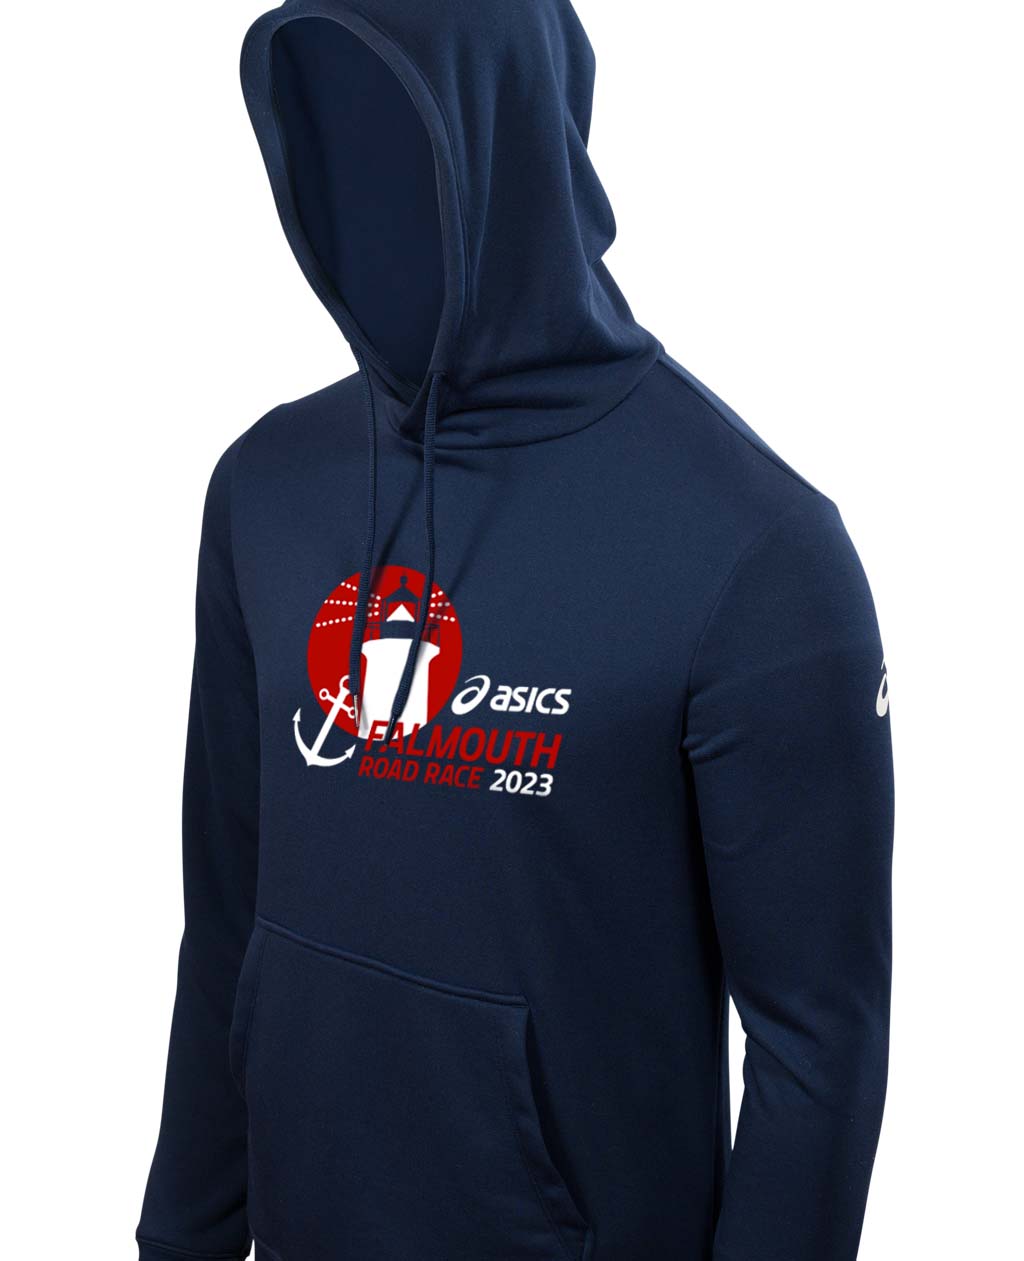 Asics Men's Falmouth Road Race 2023 French Terry Pullover Hoodie (2031A617)